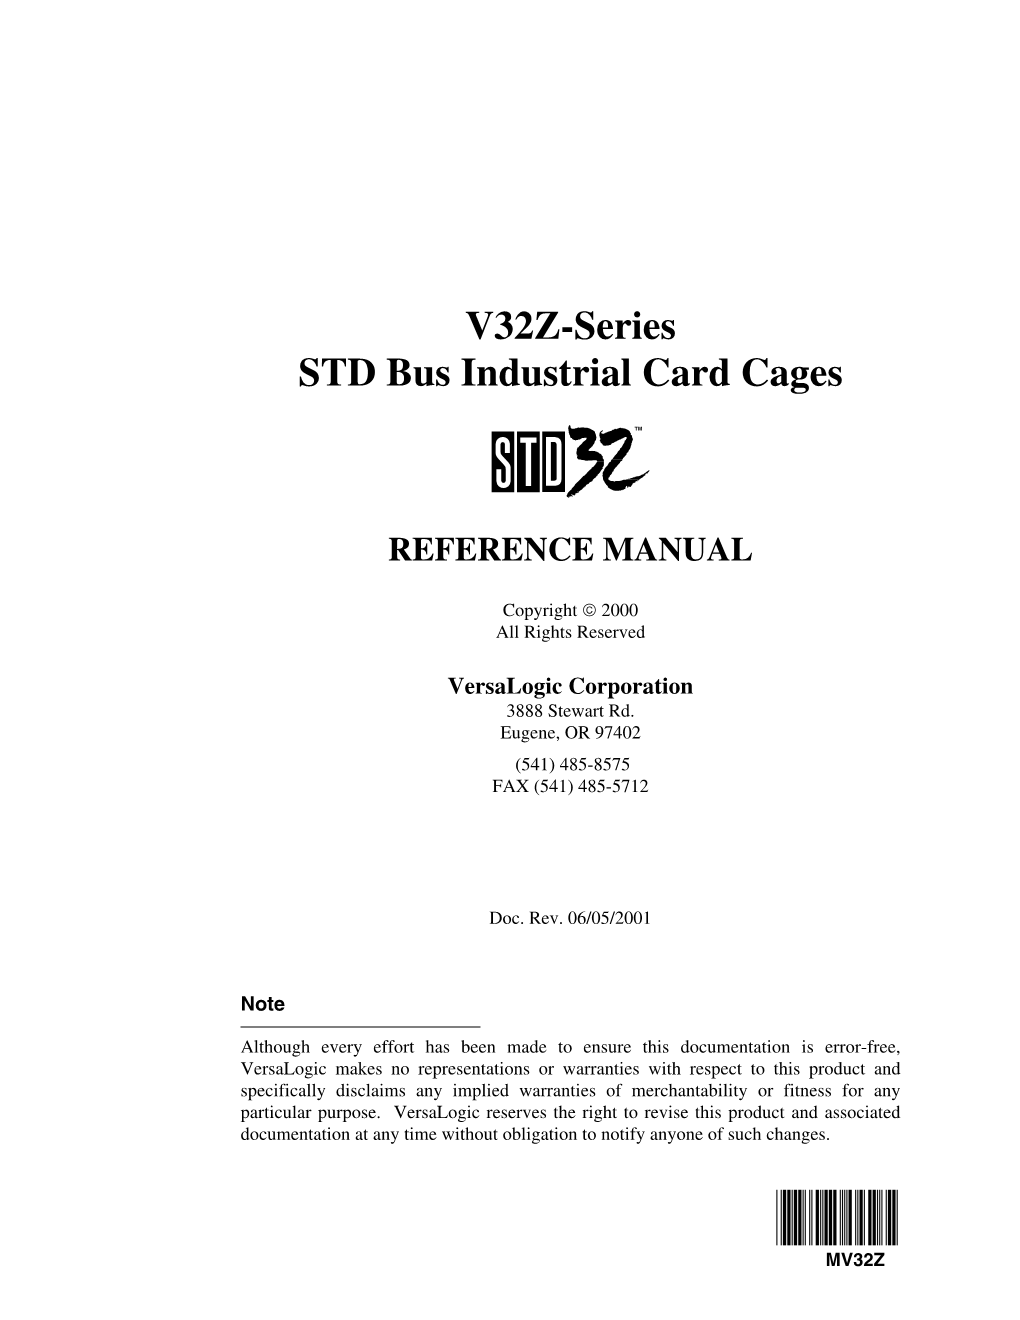 V32Z-Series STD Bus Industrial Card Cages